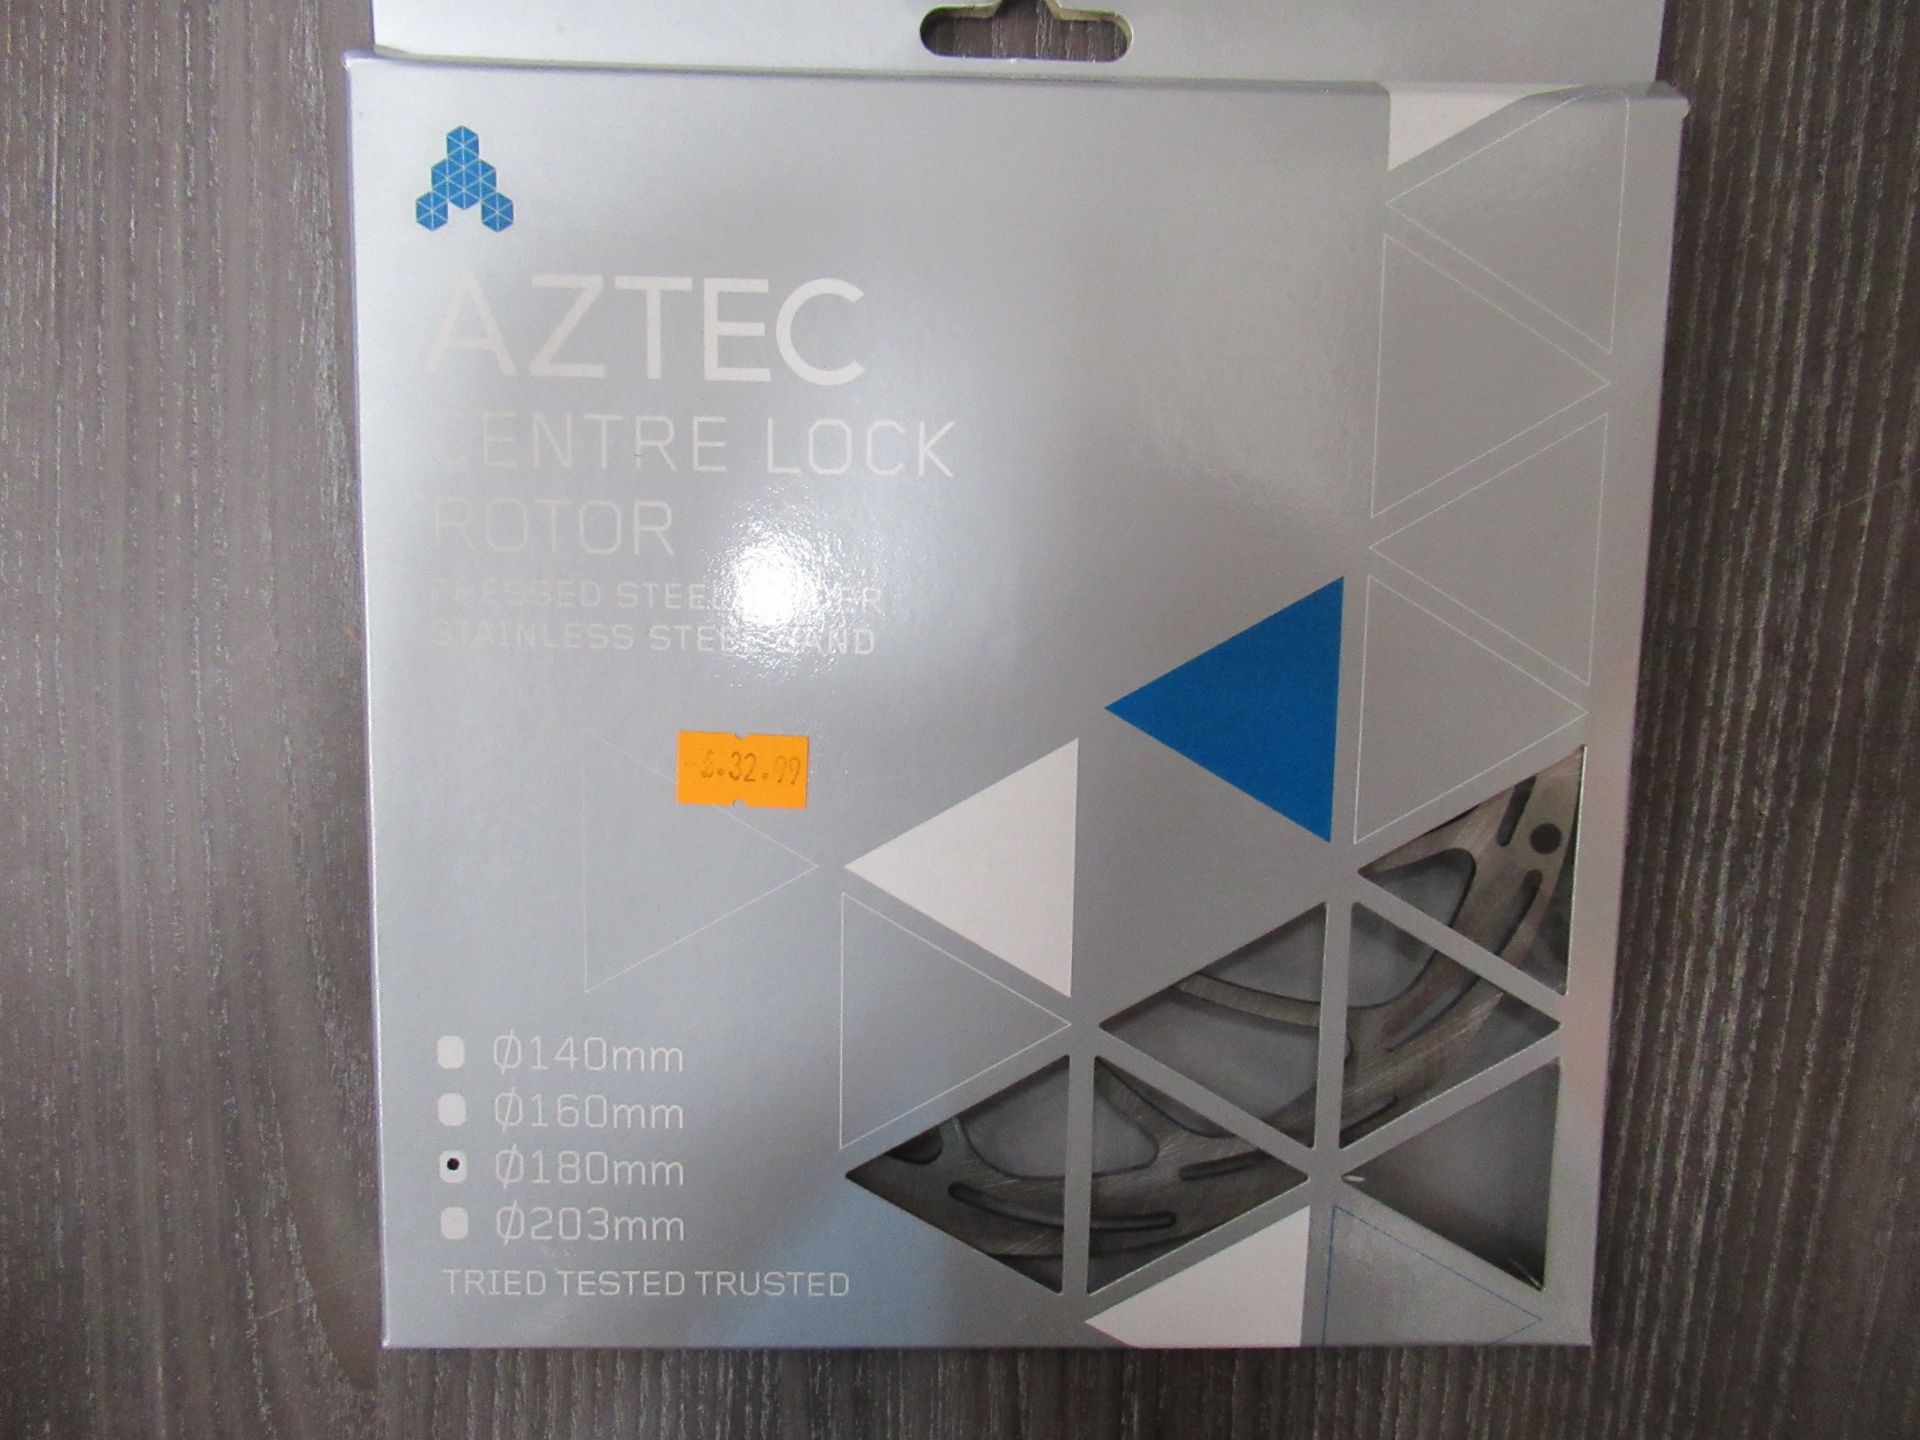 6 x Aztec Centre Lock Rotor's: 2 x 160mm (RRP£28.99 each); 3 x 180mm (RRP£32.99) and 1 x 203mm (RRP£ - Image 10 of 13